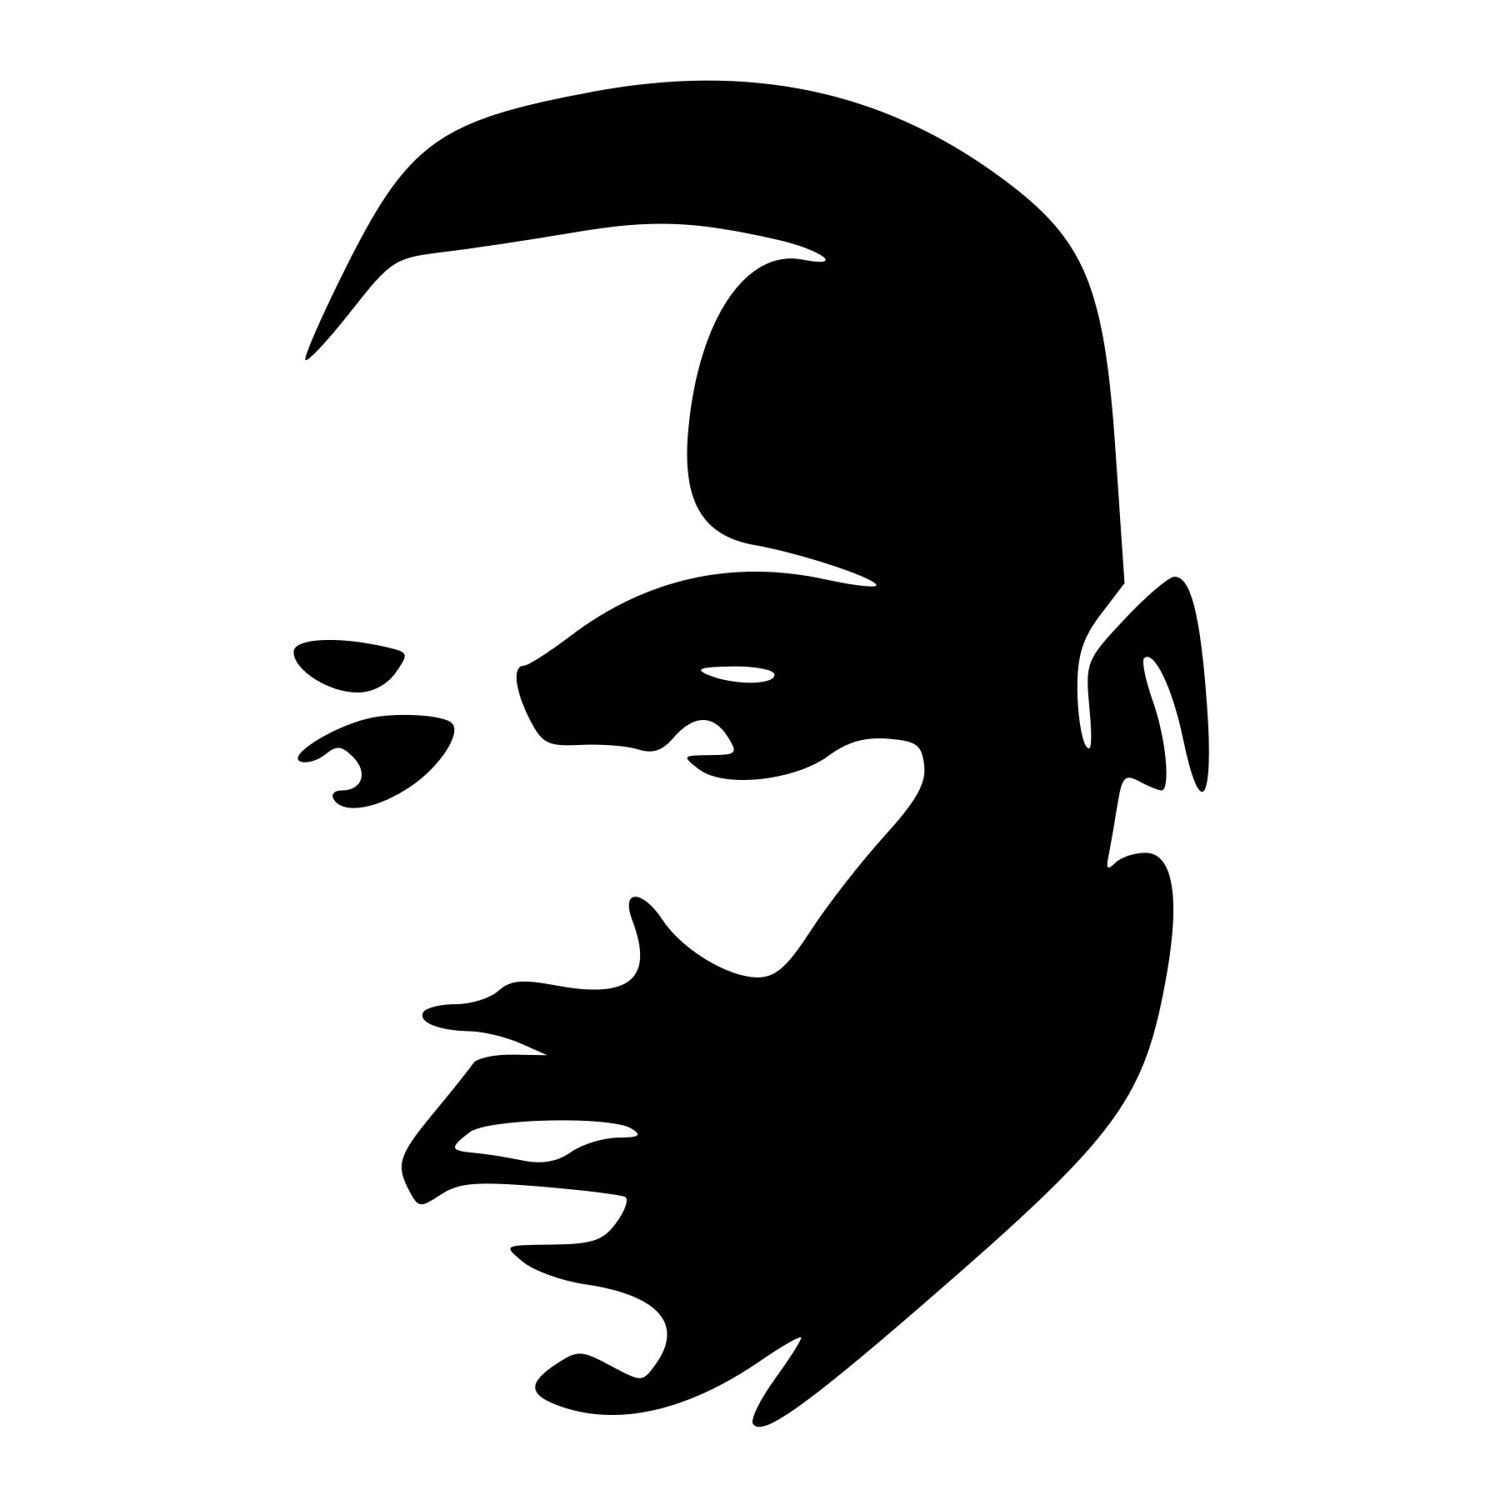 Download Martin Luther King Jr. Die-Cut Decal Car Window Wall Bumper